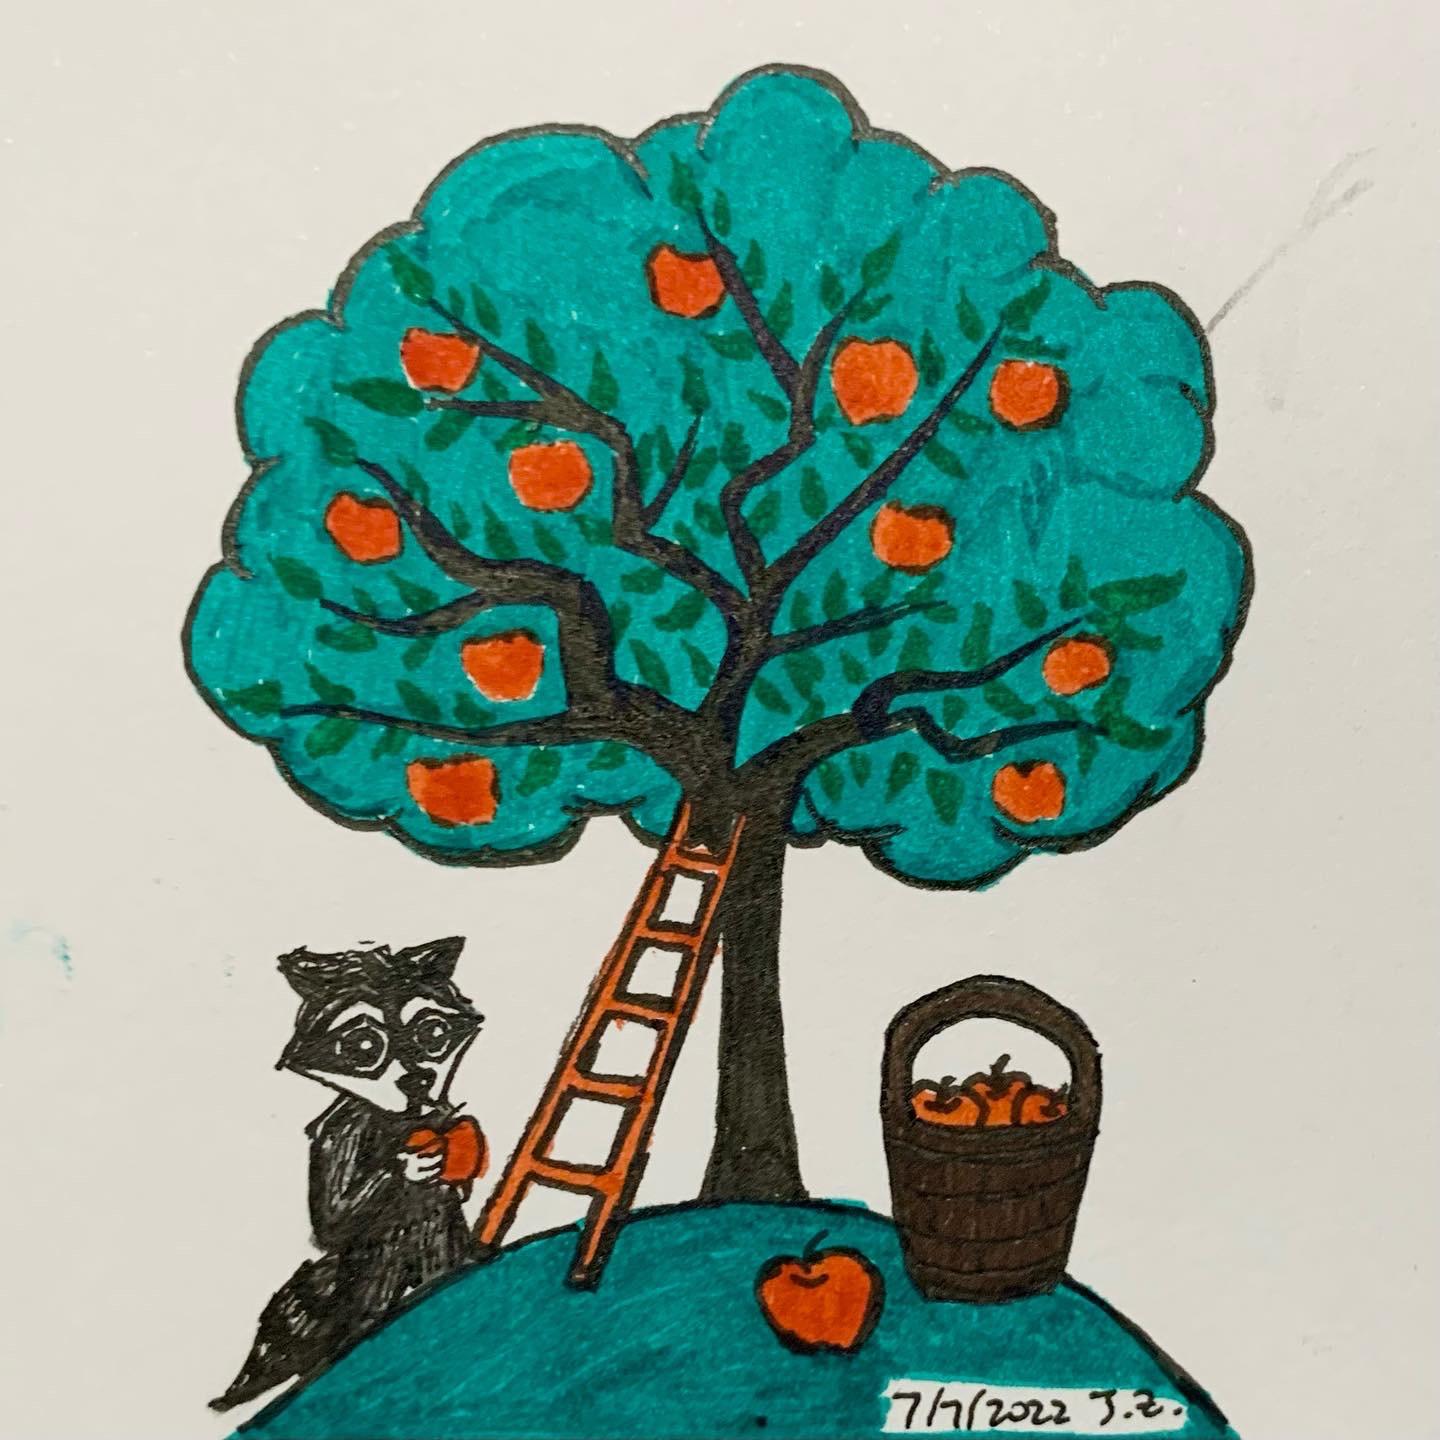 Raccoon picks original apples from apple orchard tree 7/7/2022 Sketchdaily